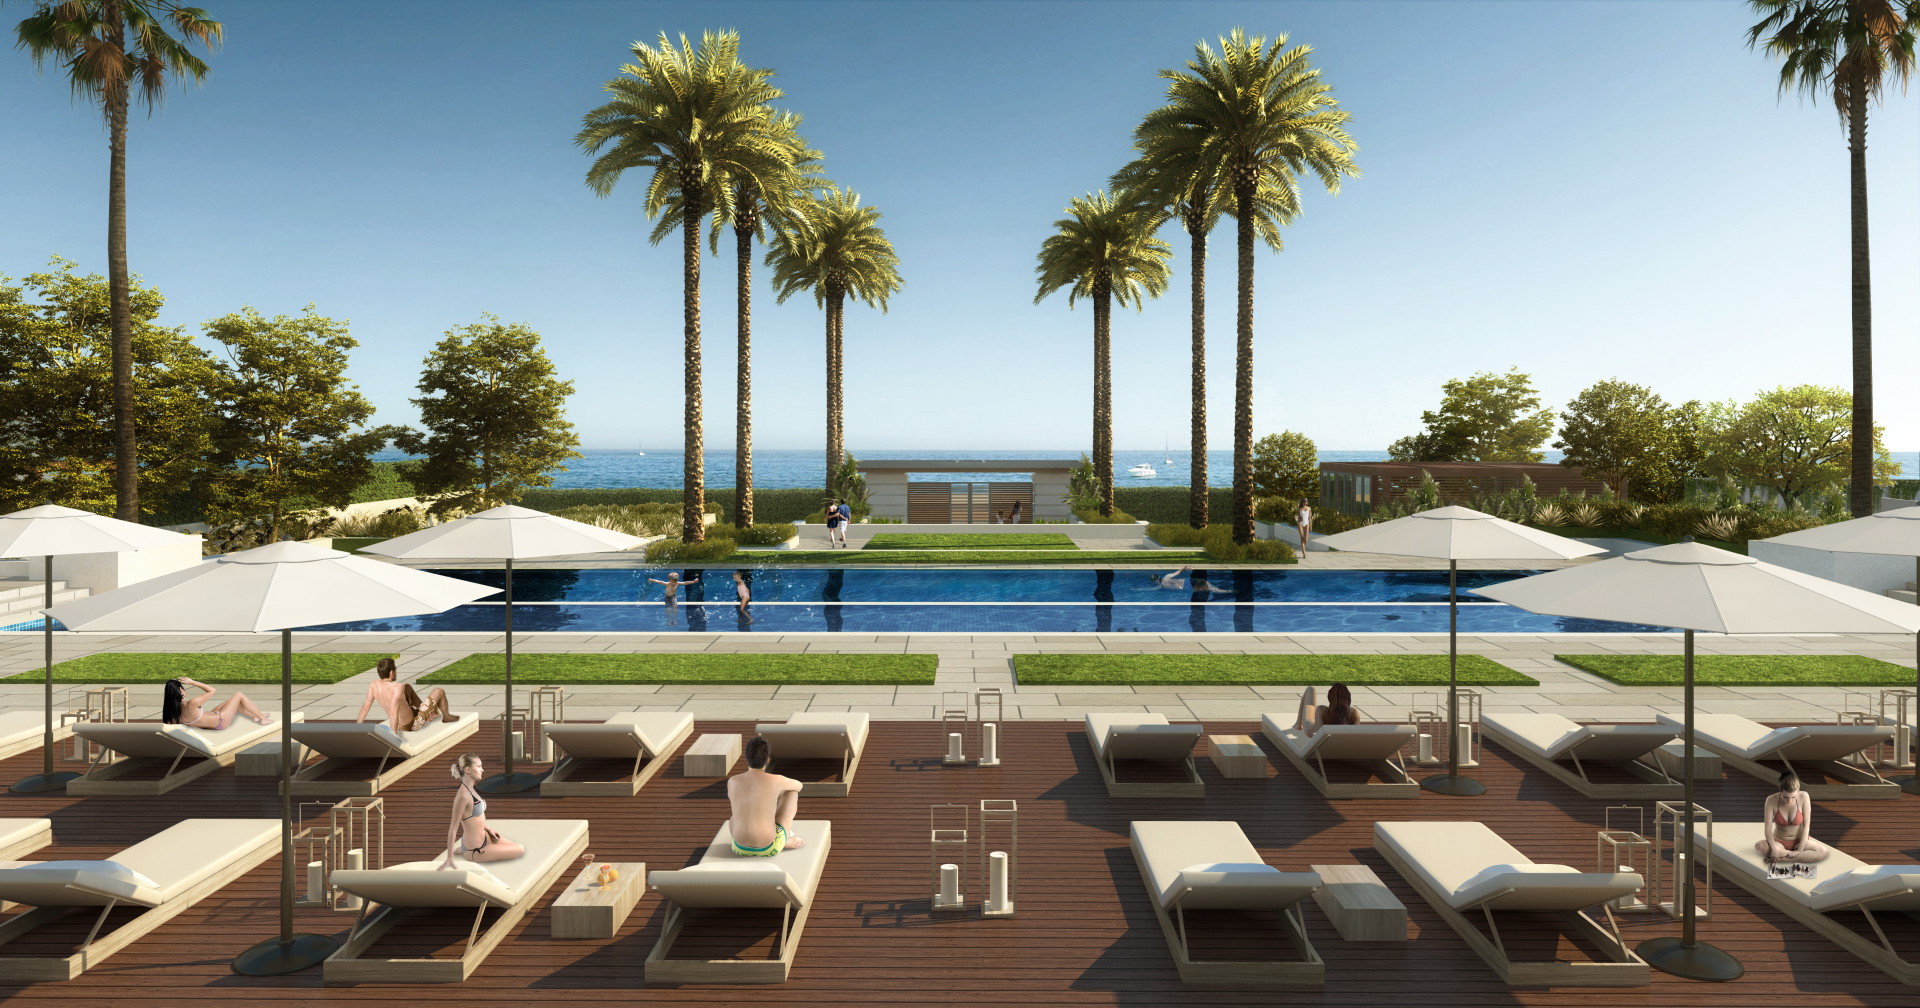 Exclusive frontline beach complex of 24 apartments, 6 penthouses, 6 bungalows and 2 villas with beautiful views of the sea and direct access to the beach and the promenade